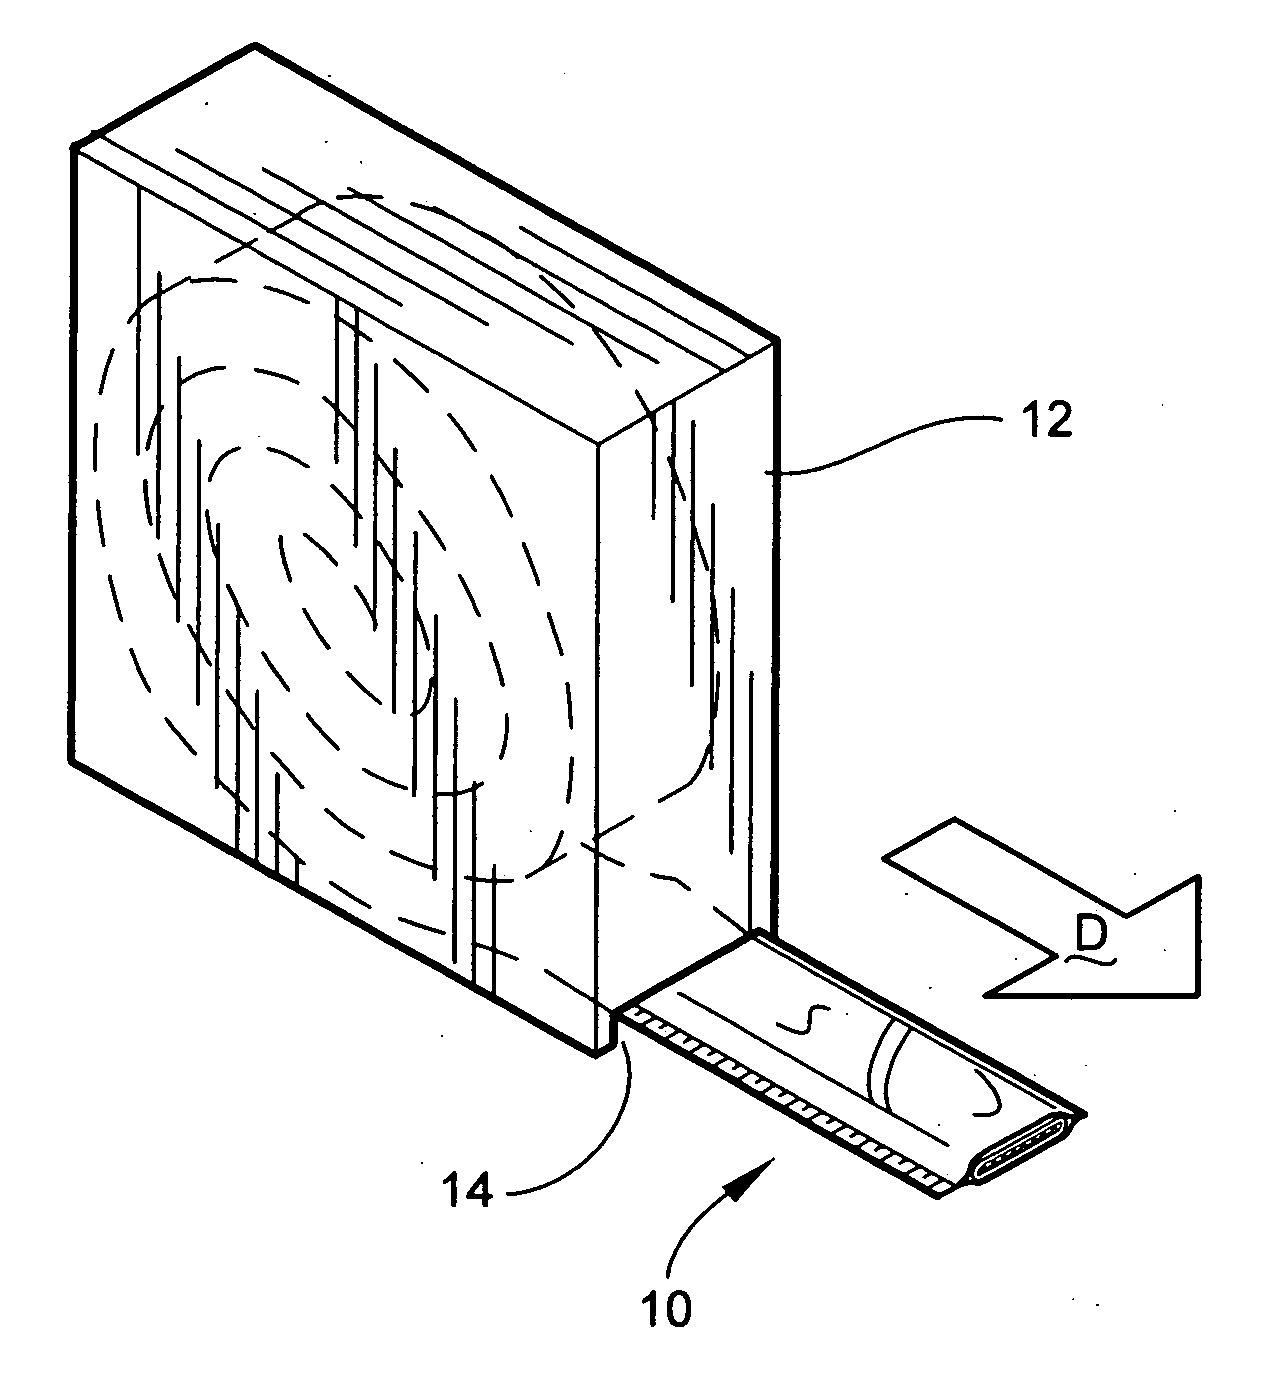 Orthopedic fiberglass bandage with a non-fray substrate